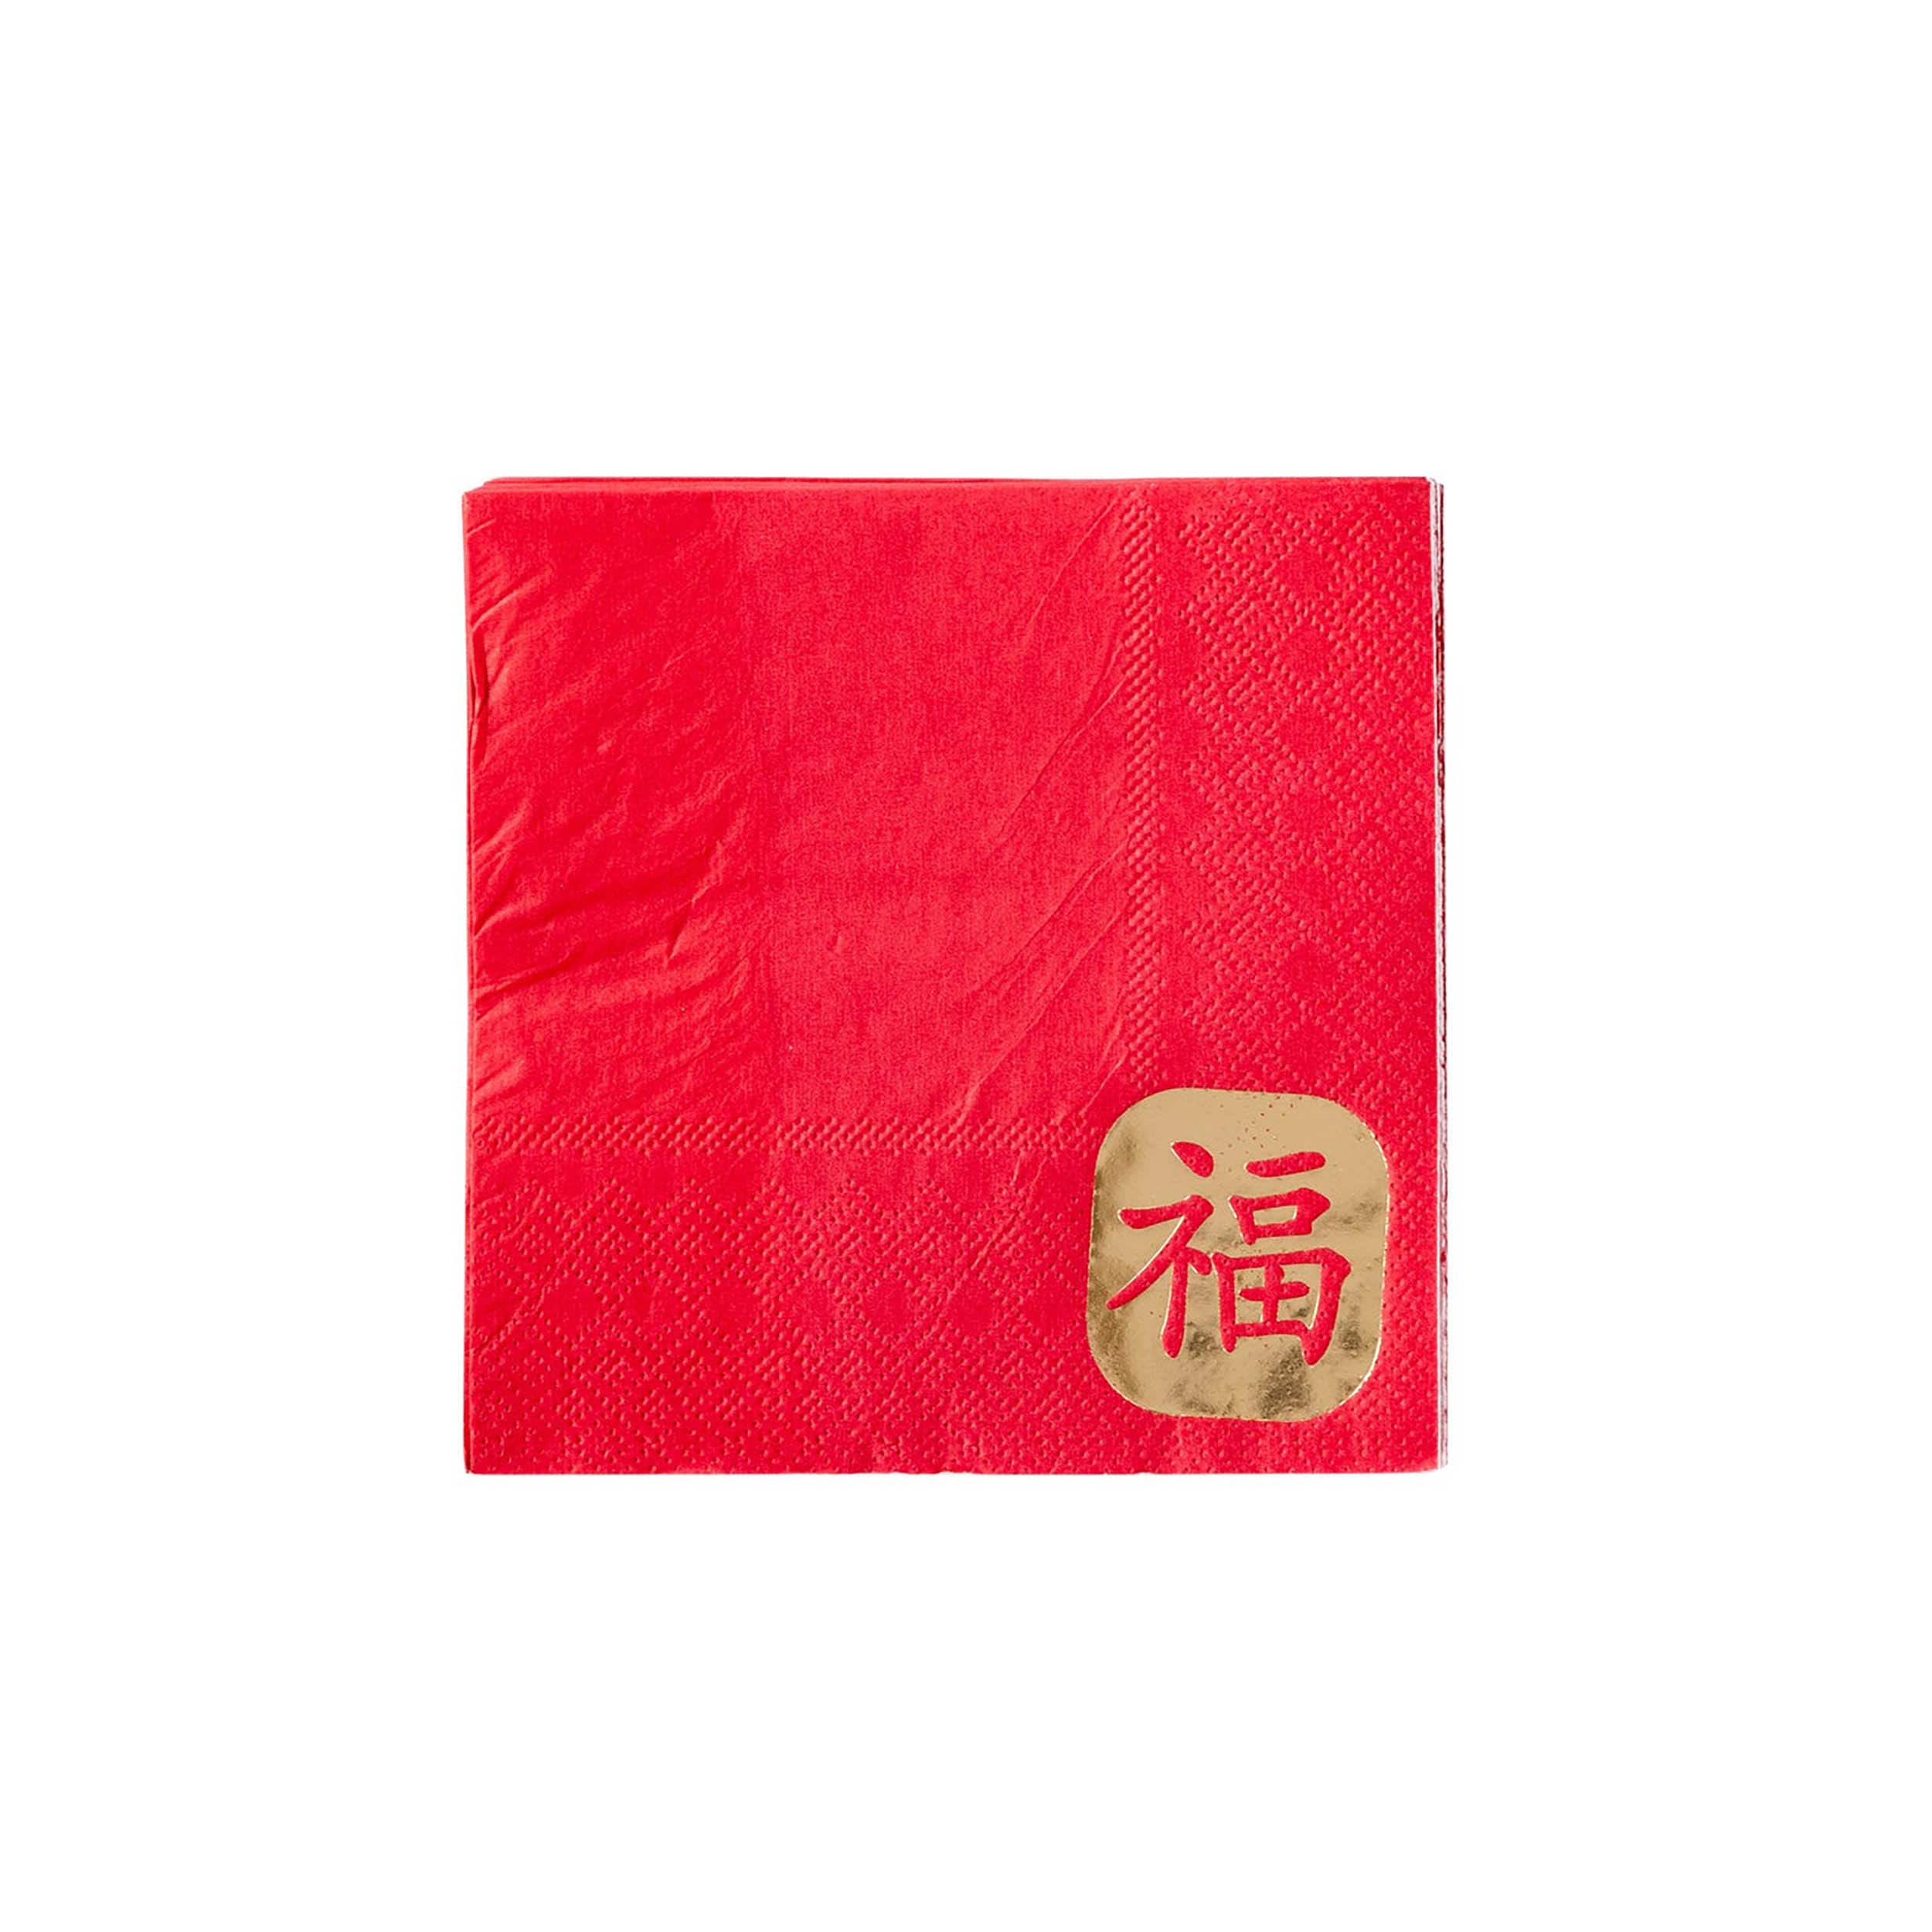 Chinese New Year Napkins | Spring Festival - Lunar New Year Napkins - Chinese New Year Party Supplies - Lunar New Year Decoration